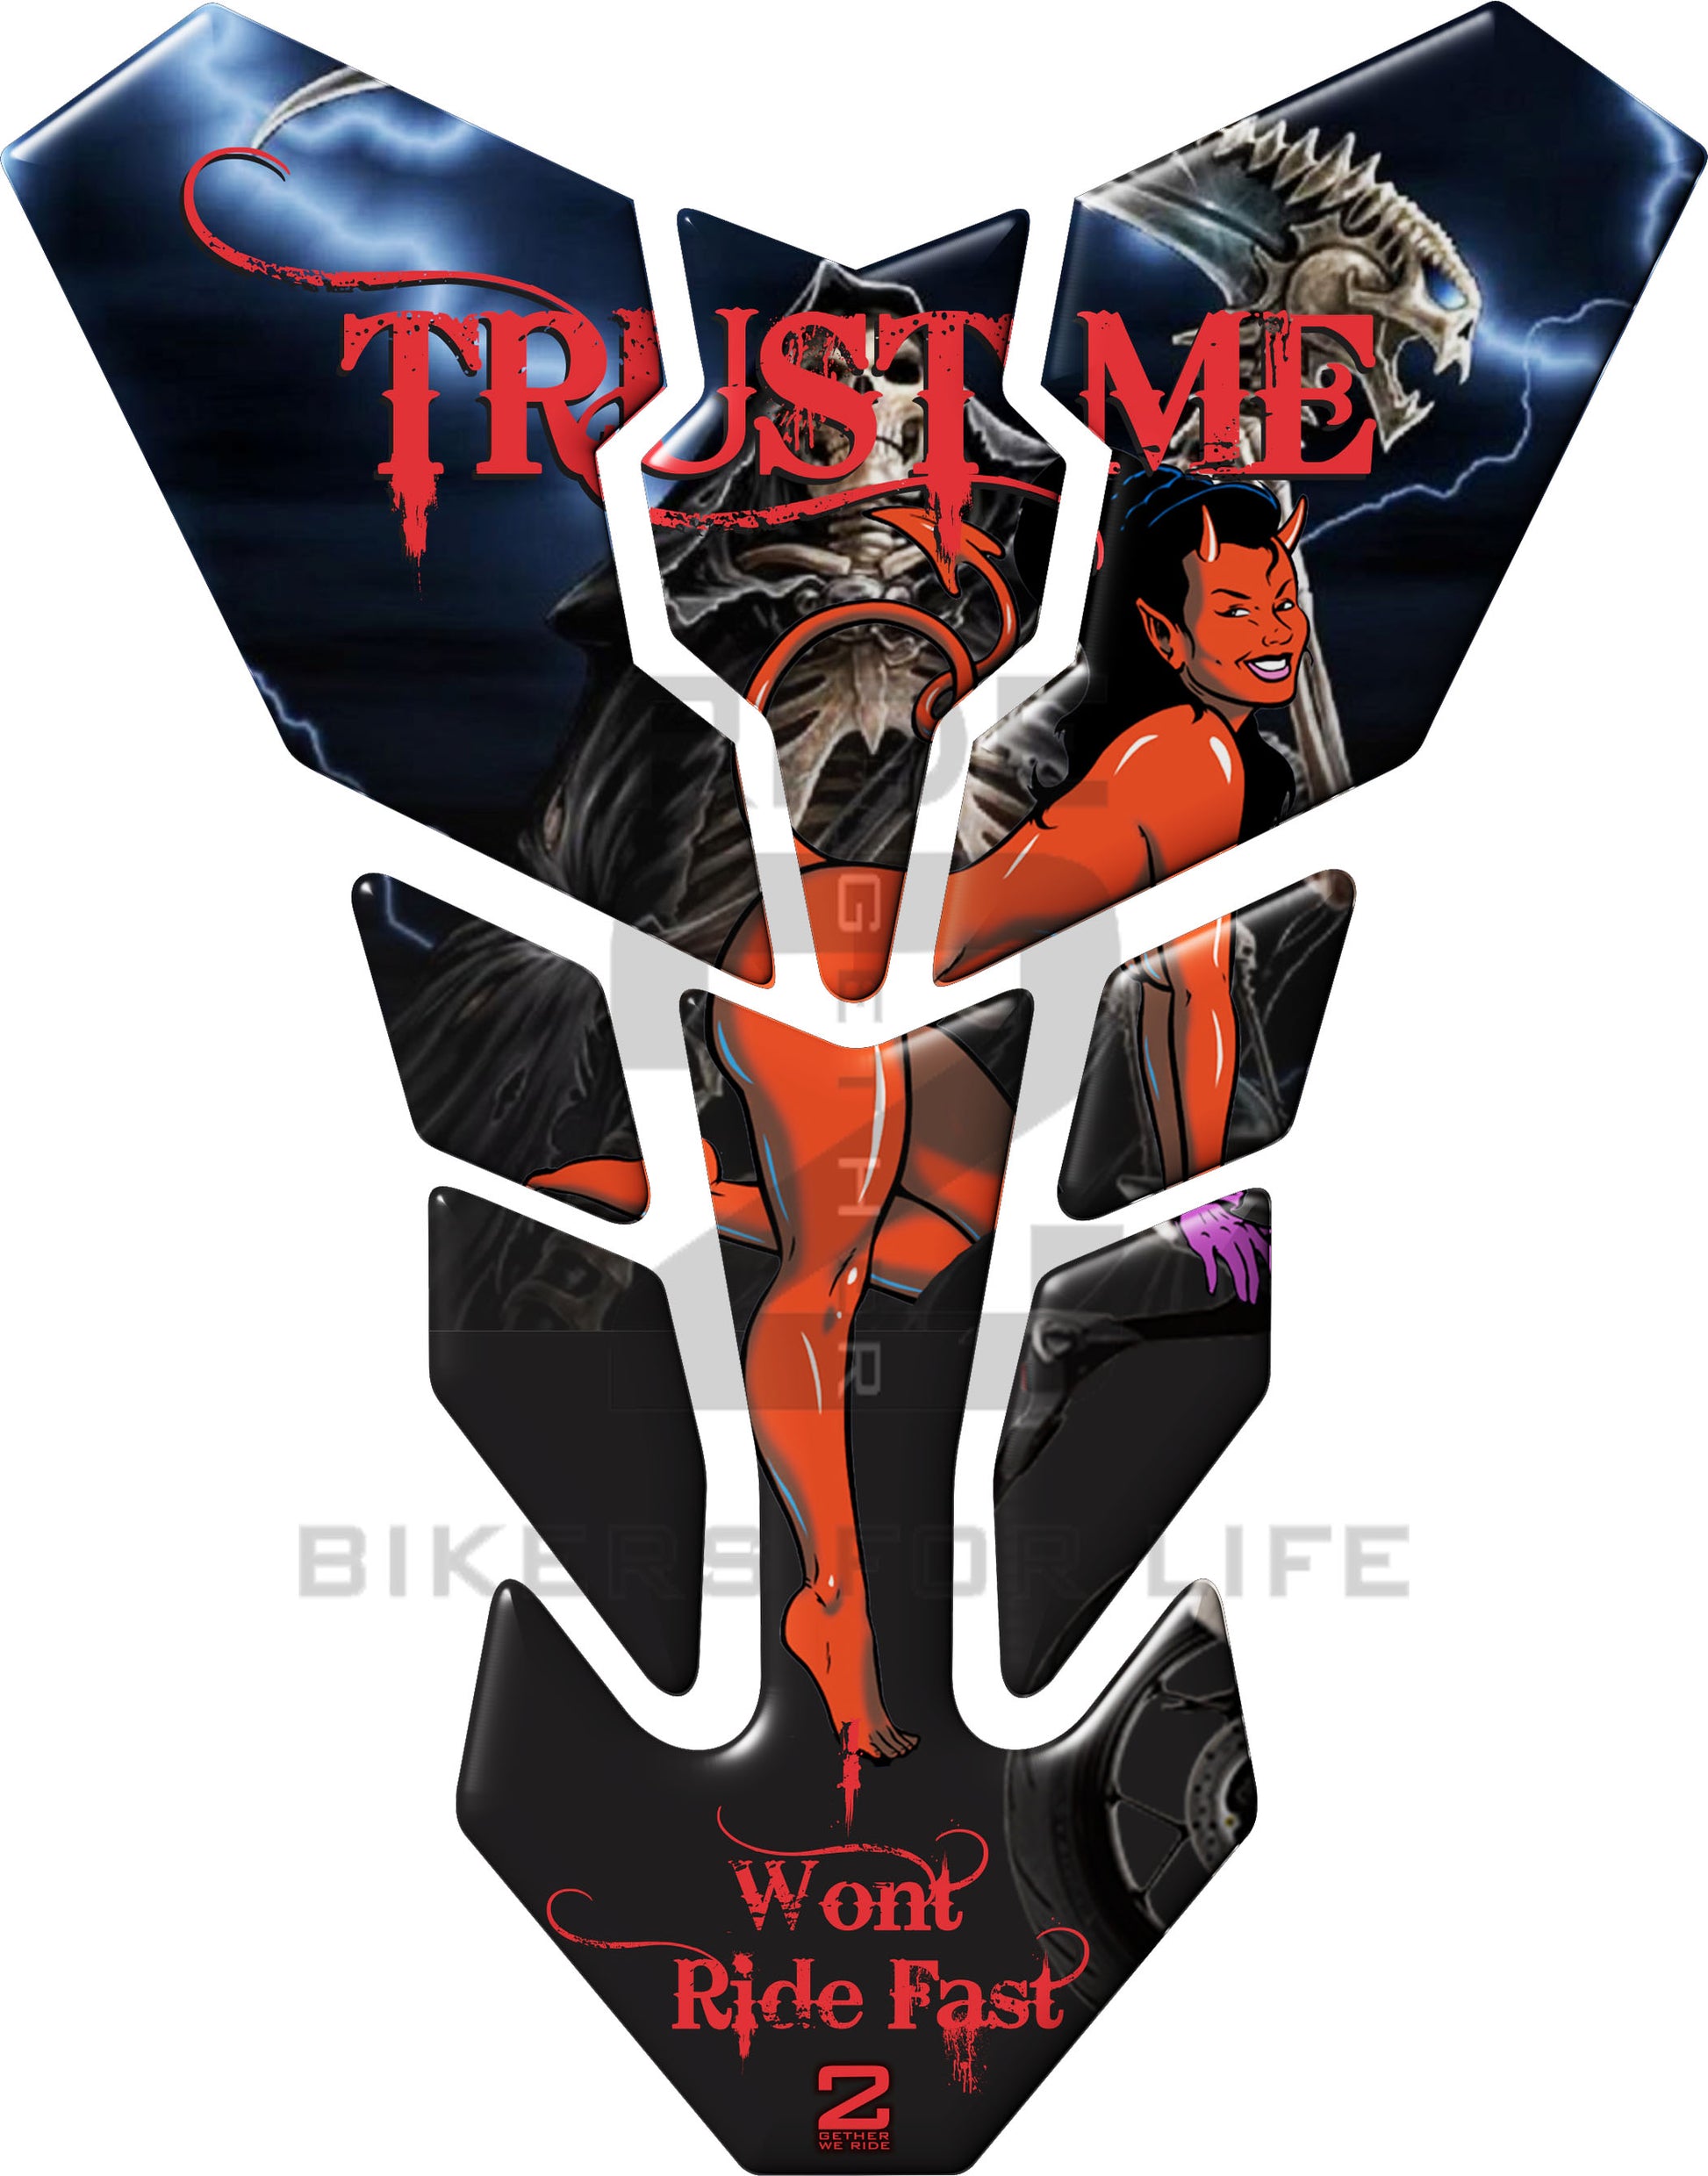 Universal Fit Reaper with She Devil " Trust Me  "Motor Bike Tank Pad Protector. A Street Pad which fits most motorcycles.